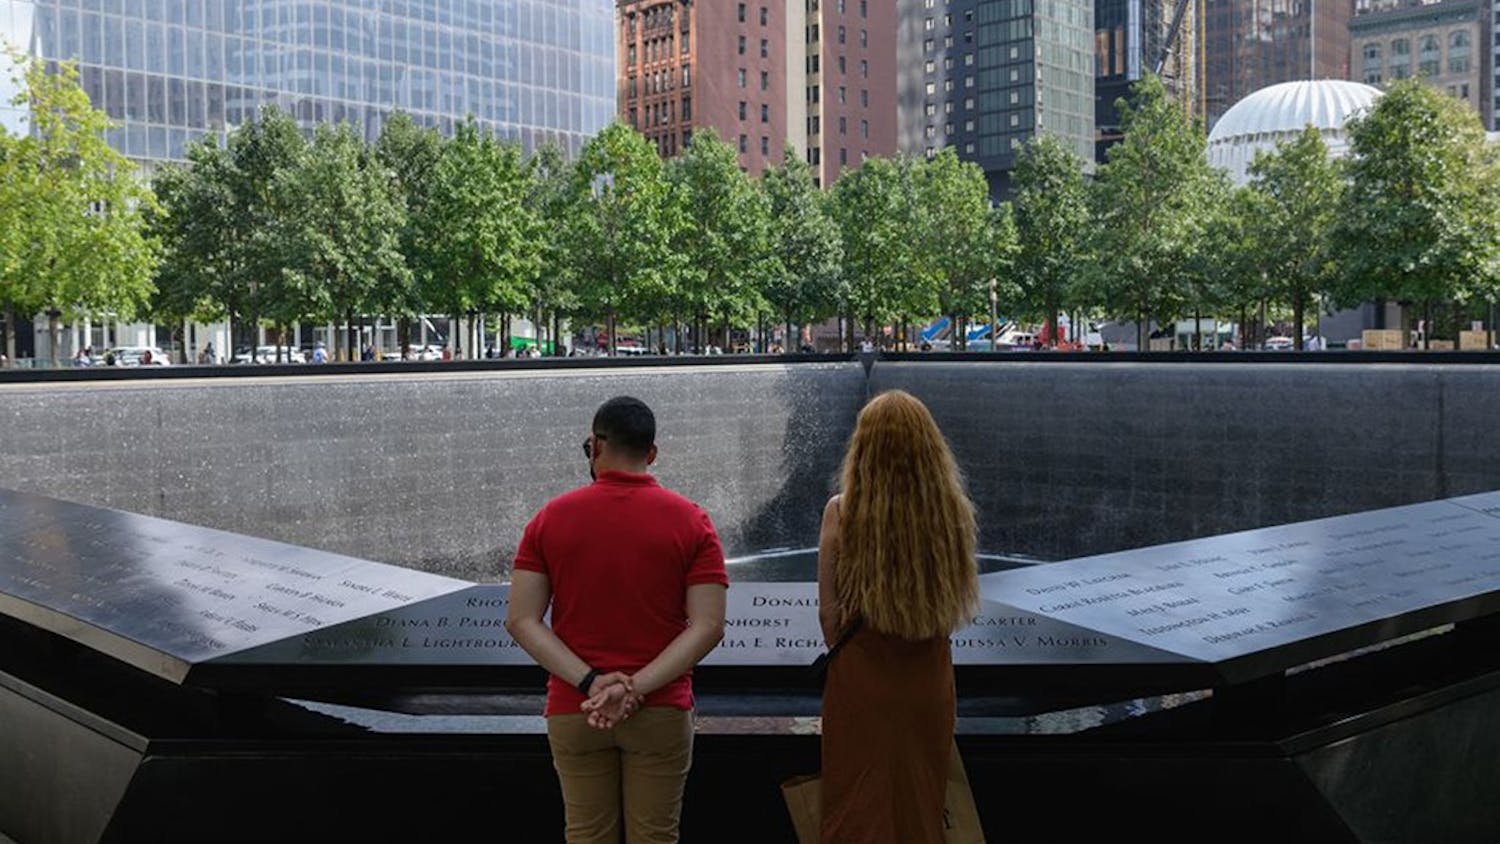 A couple stands before the National September 11 Memorial, marking the site of the south tower at the World Trade Center in New York, on September 8, 2021. (Angela Weiss/AFP via Getty Images/TNS)